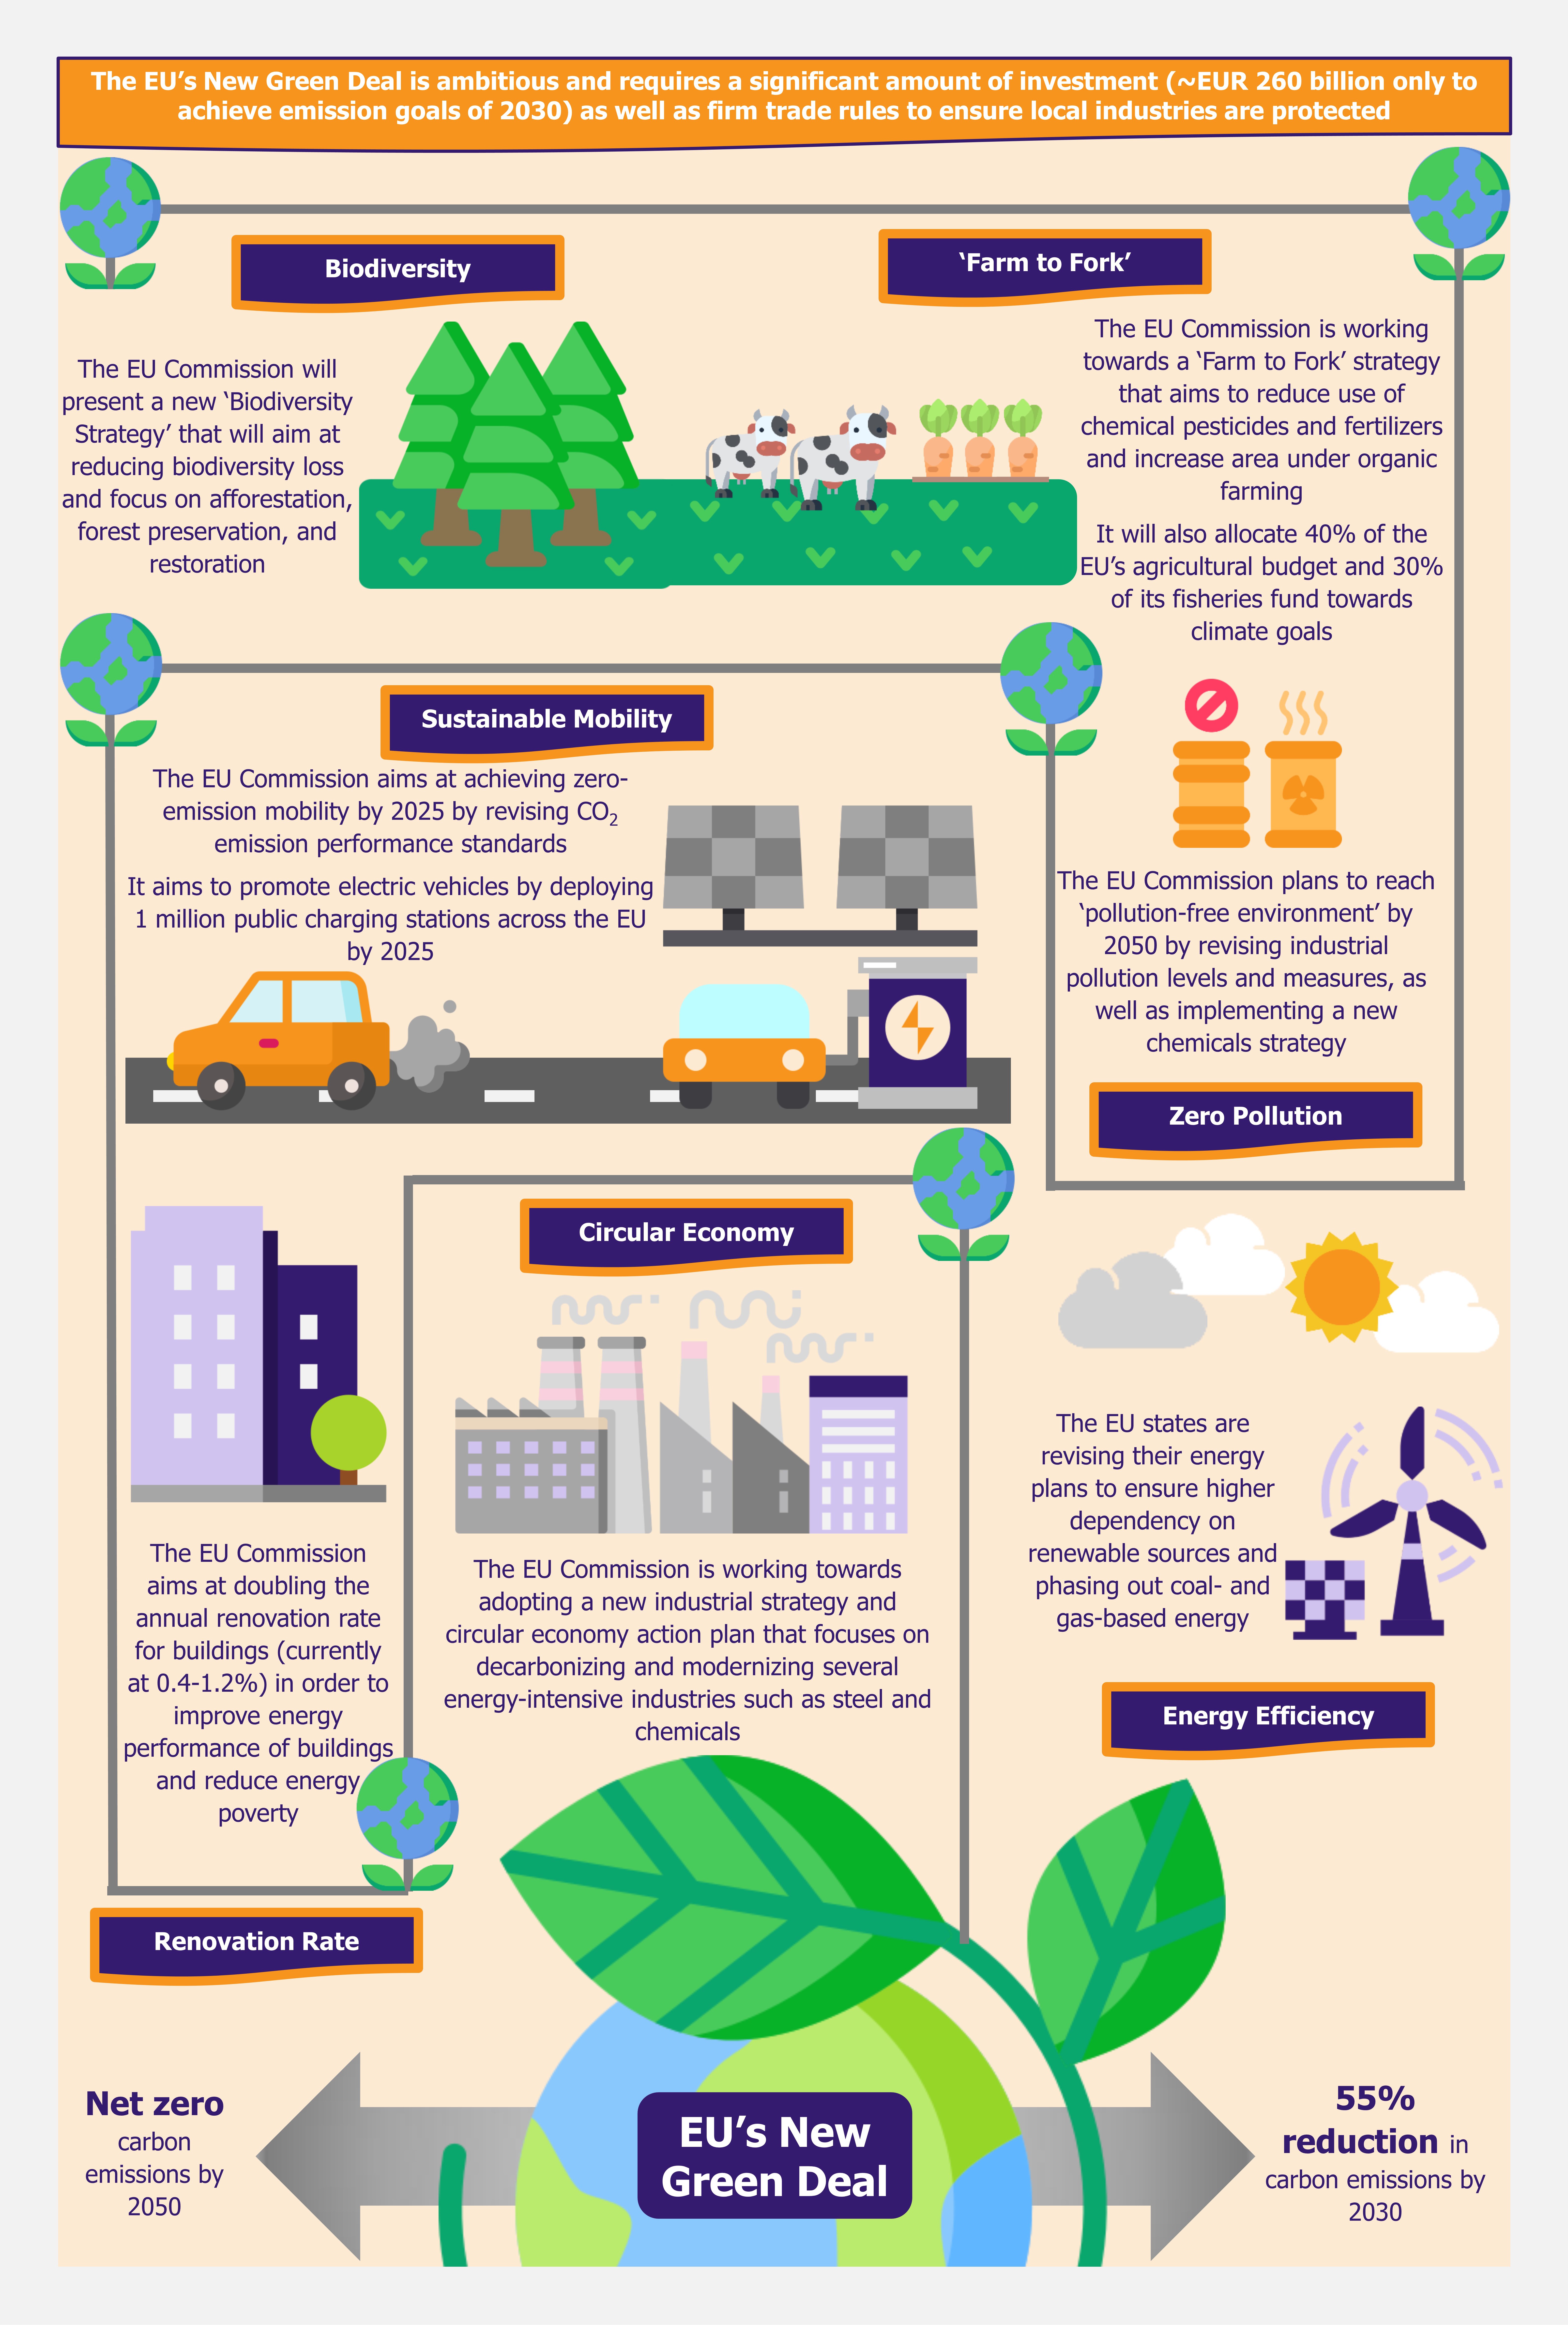 The EU Green Deal – Good on Paper but Is That Enough by EOS Intelligence